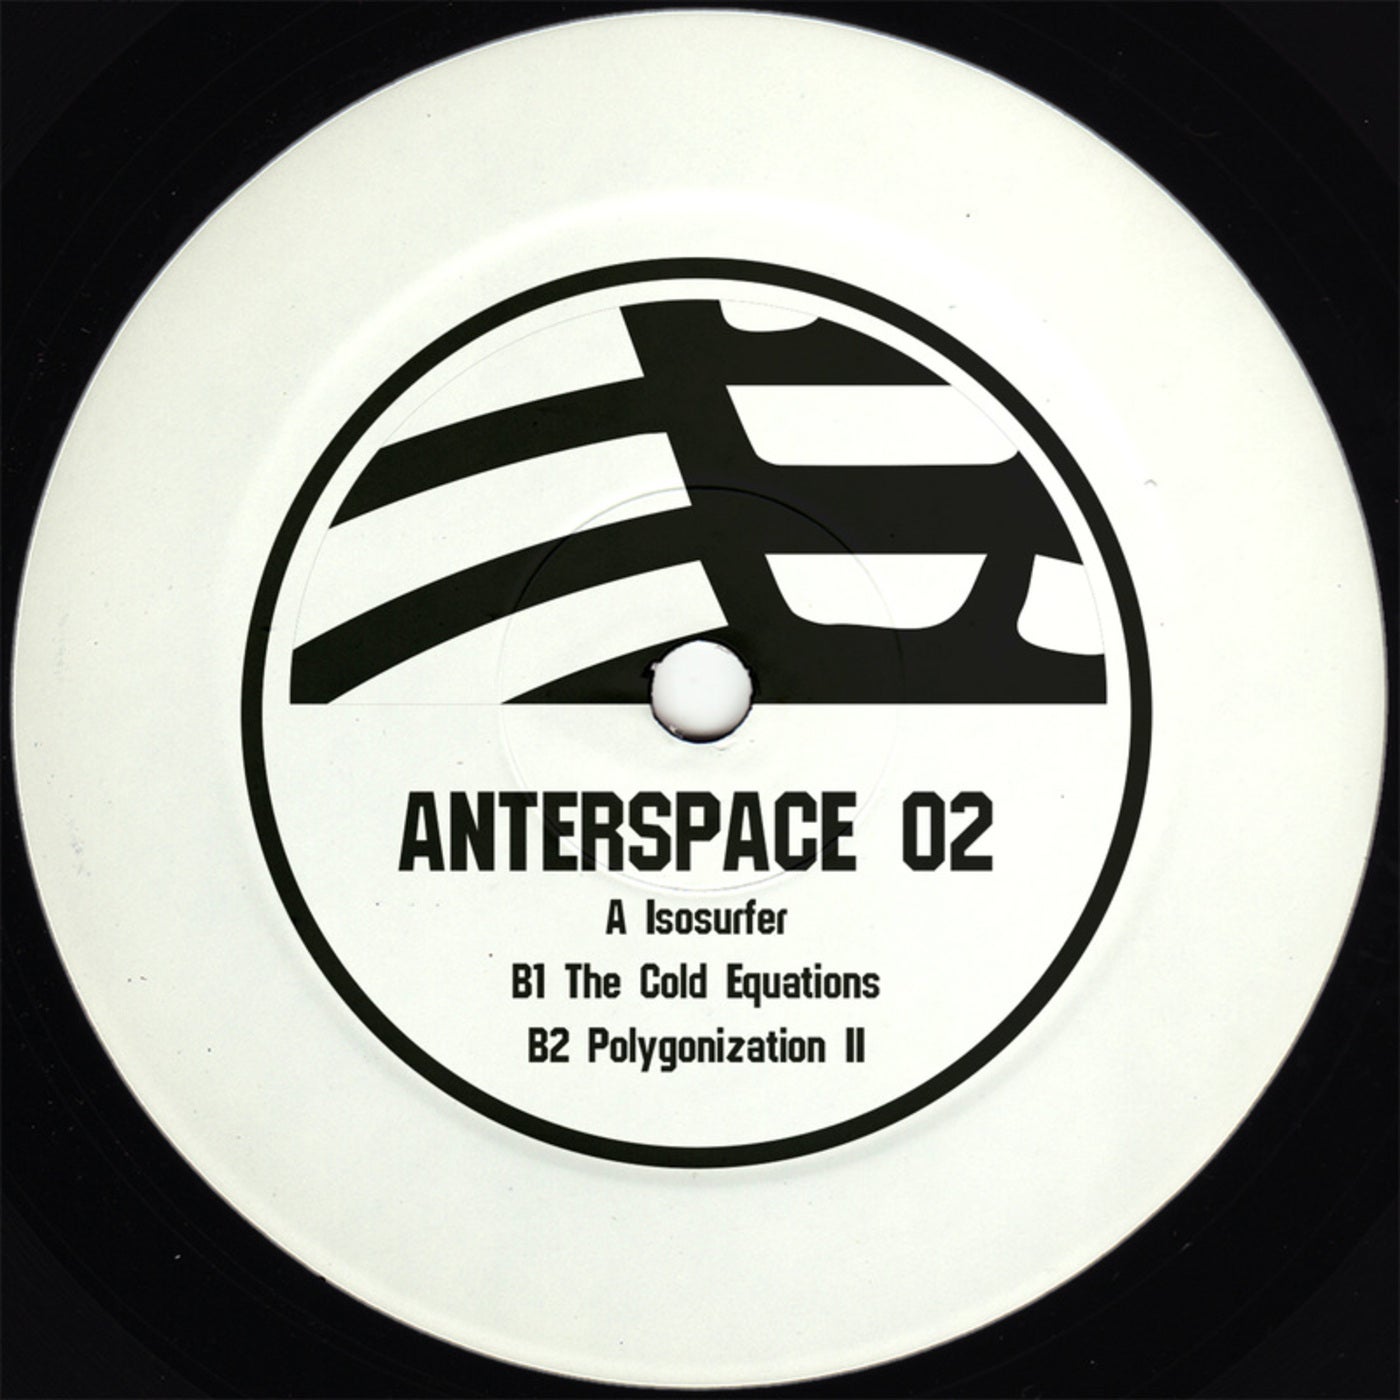 Anterspace02